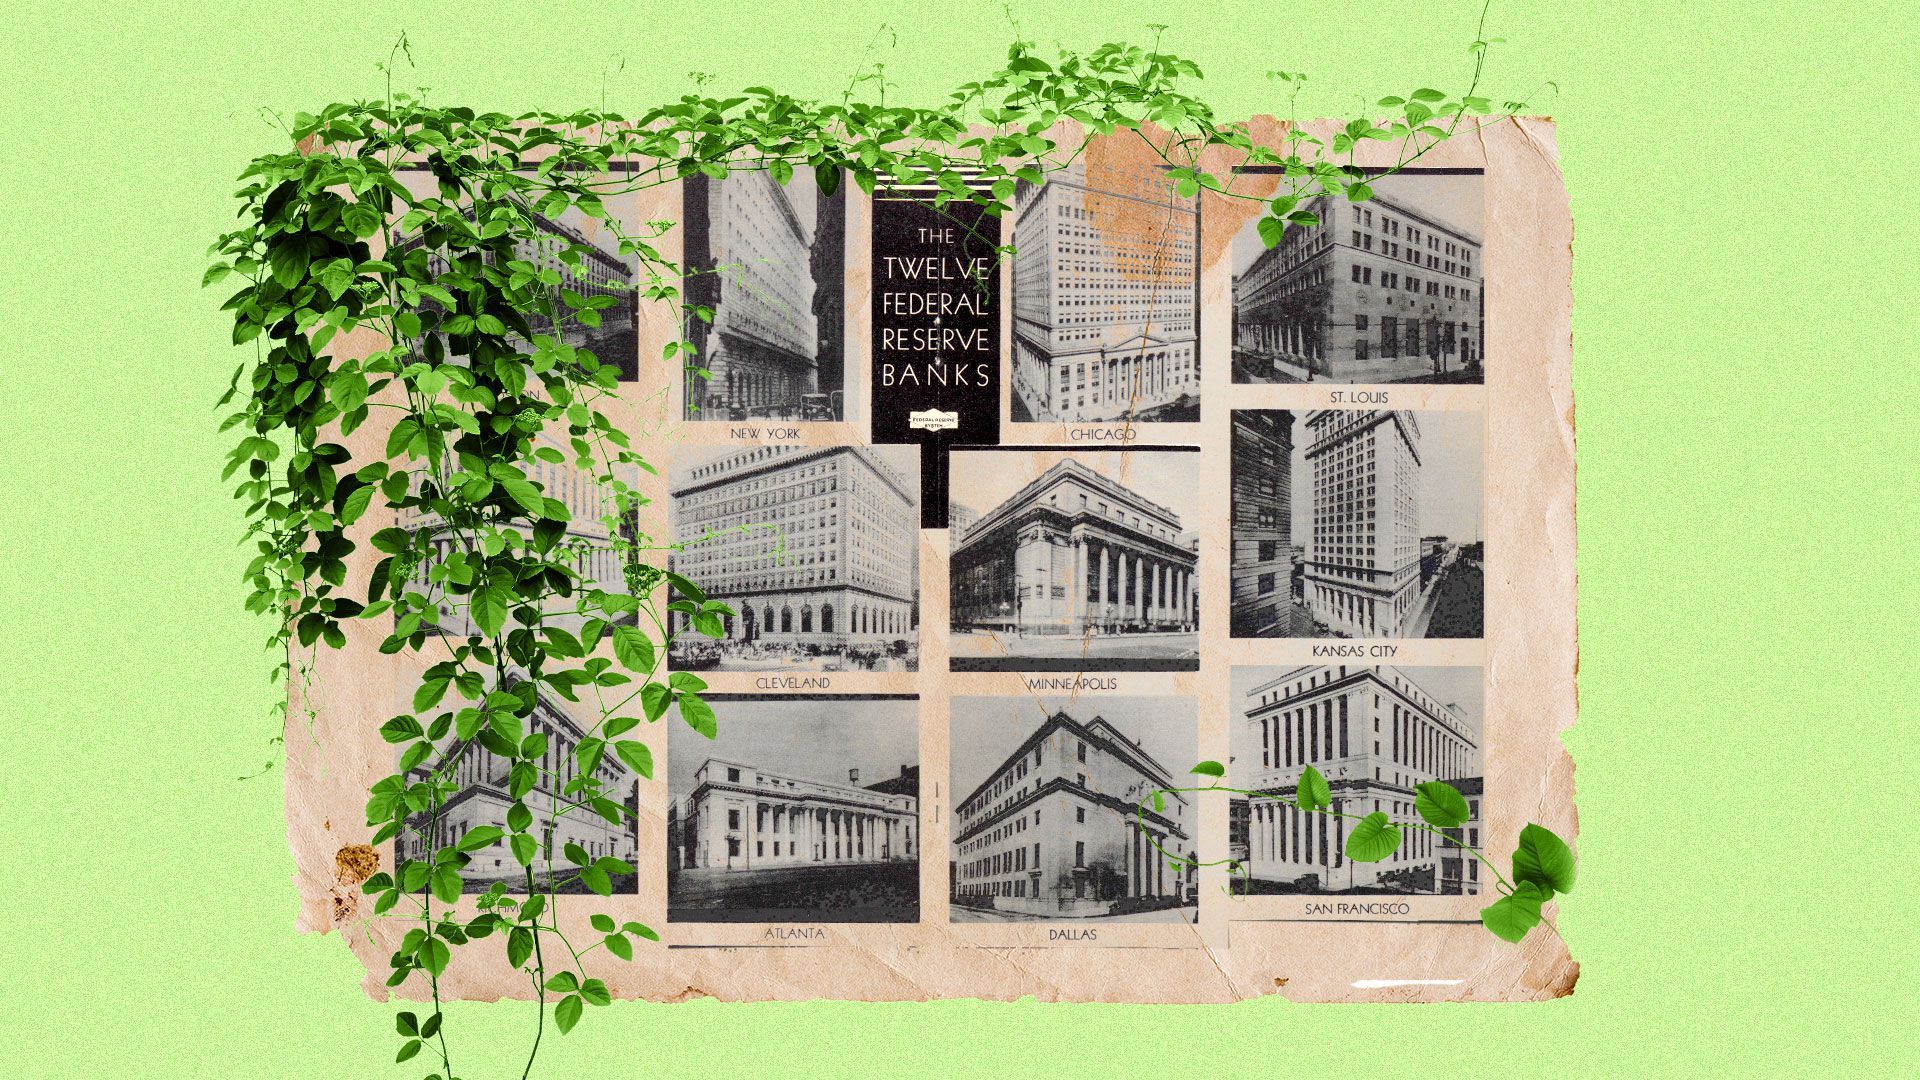 Illustrated collage of a historical image of the federal reserve banks with greenery